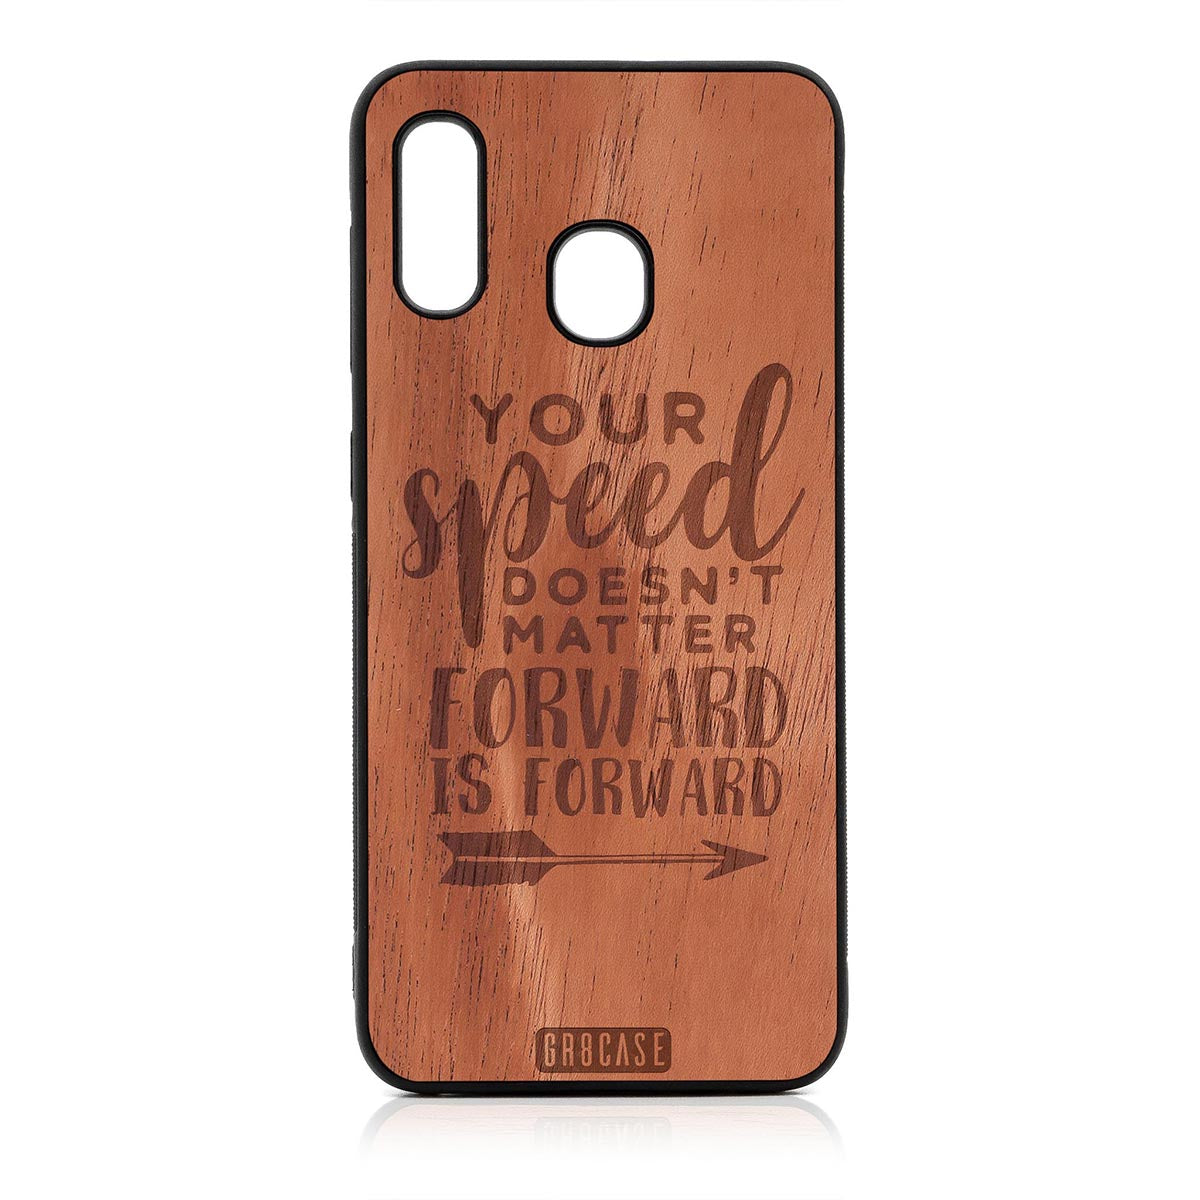 Your Speed Doesn't Matter Forward Is Forward Design Wood Case For Samsung Galaxy A20